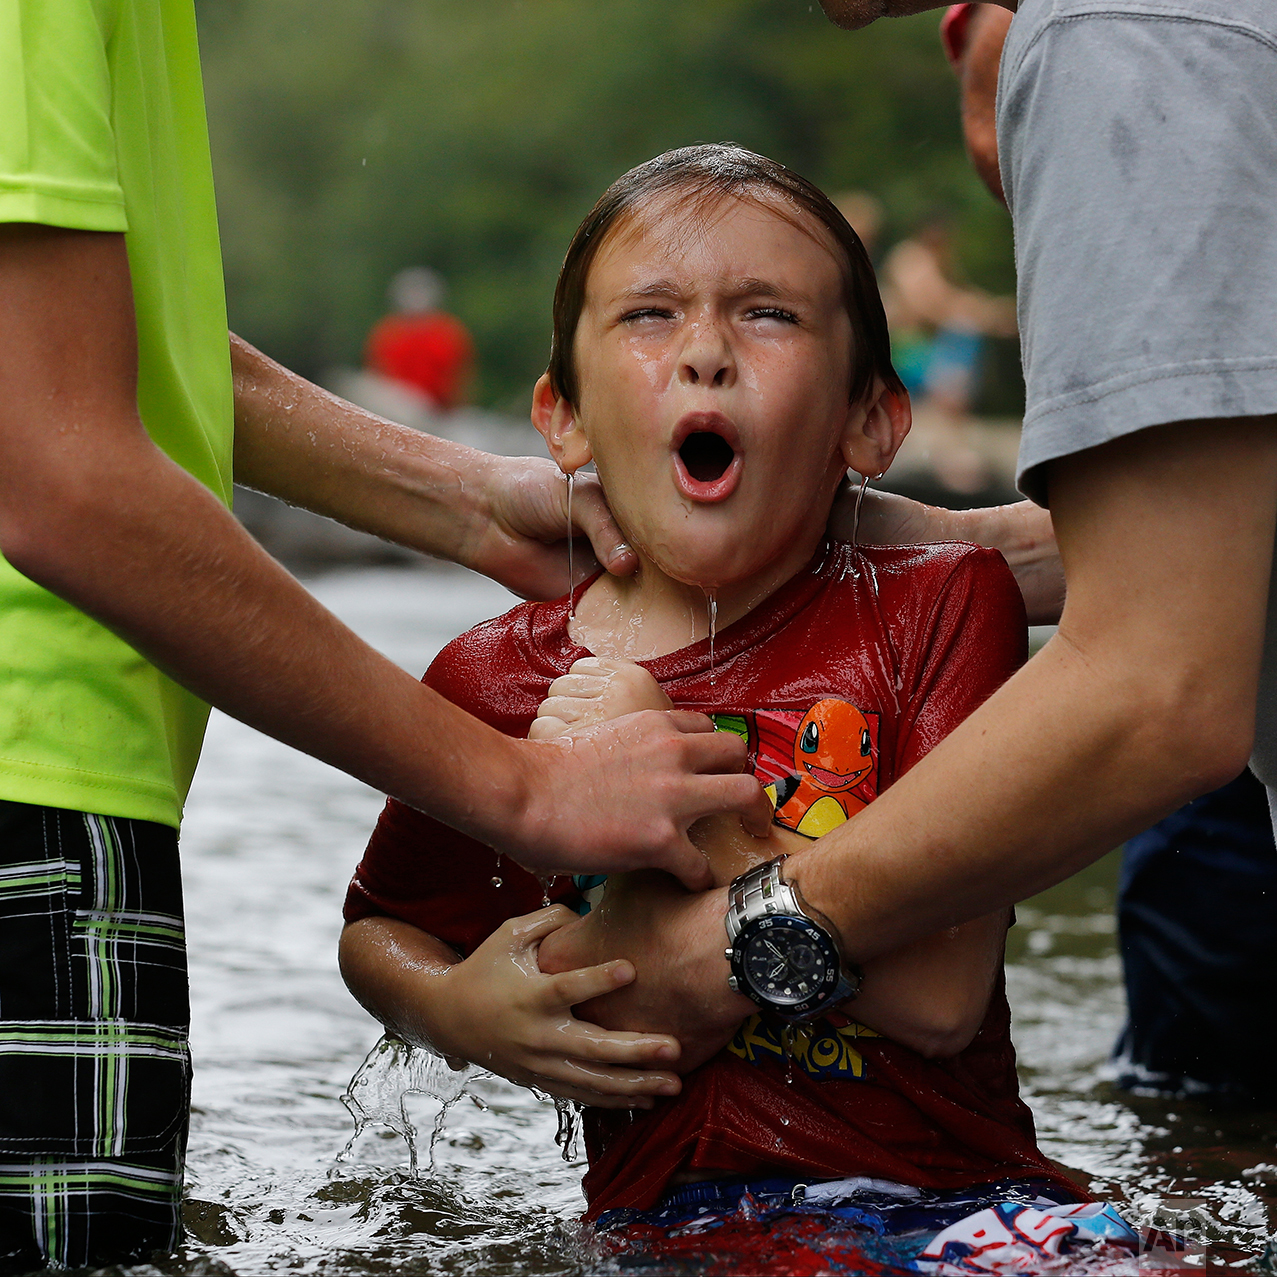  Nicholas Lewis reacts after he was baptized in the Chattahoochee River, Sunday, Sept. 18, 2016, near Demorest, Ga. Many denominations don’t fully immerse baptismal candidates, preferring to sprinkle them with water. And in churches that do immersion